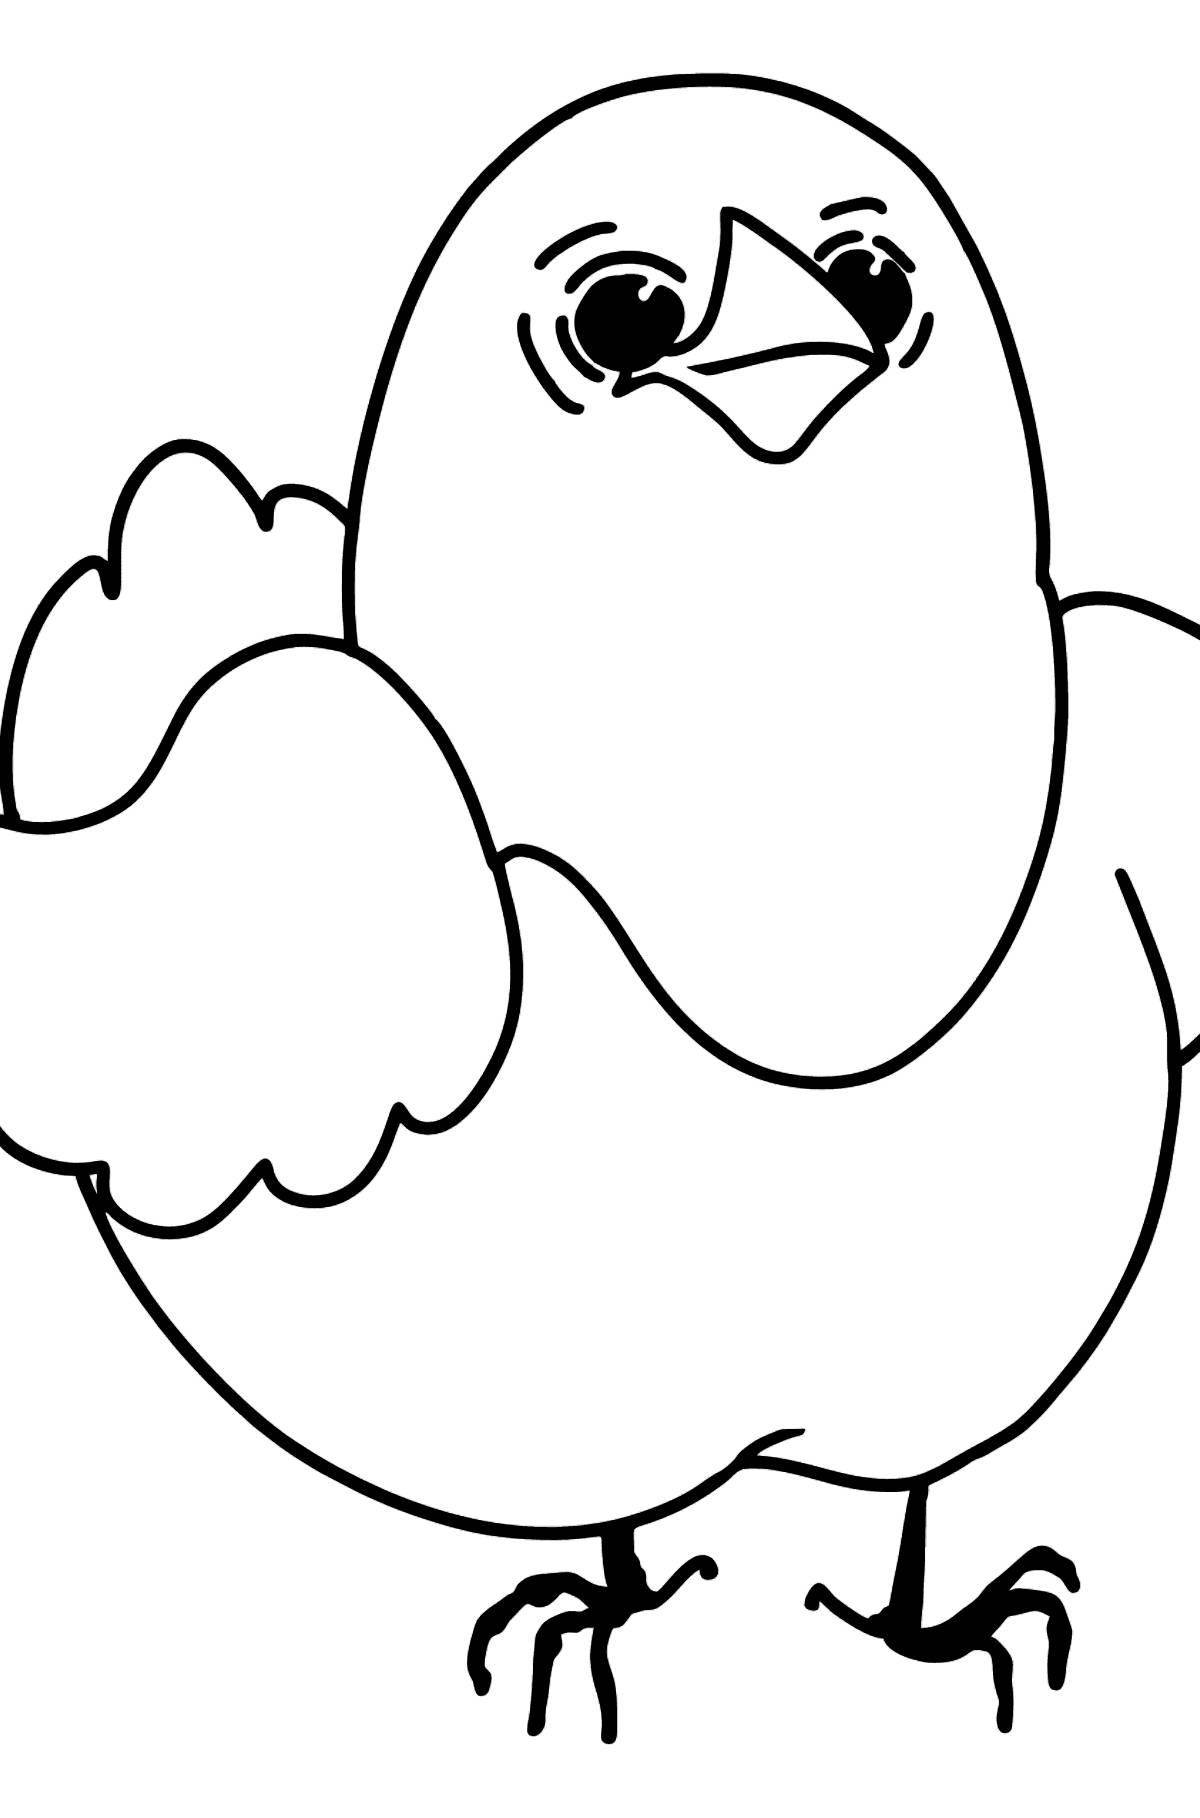 Cute chick coloring page for 3-4 year olds